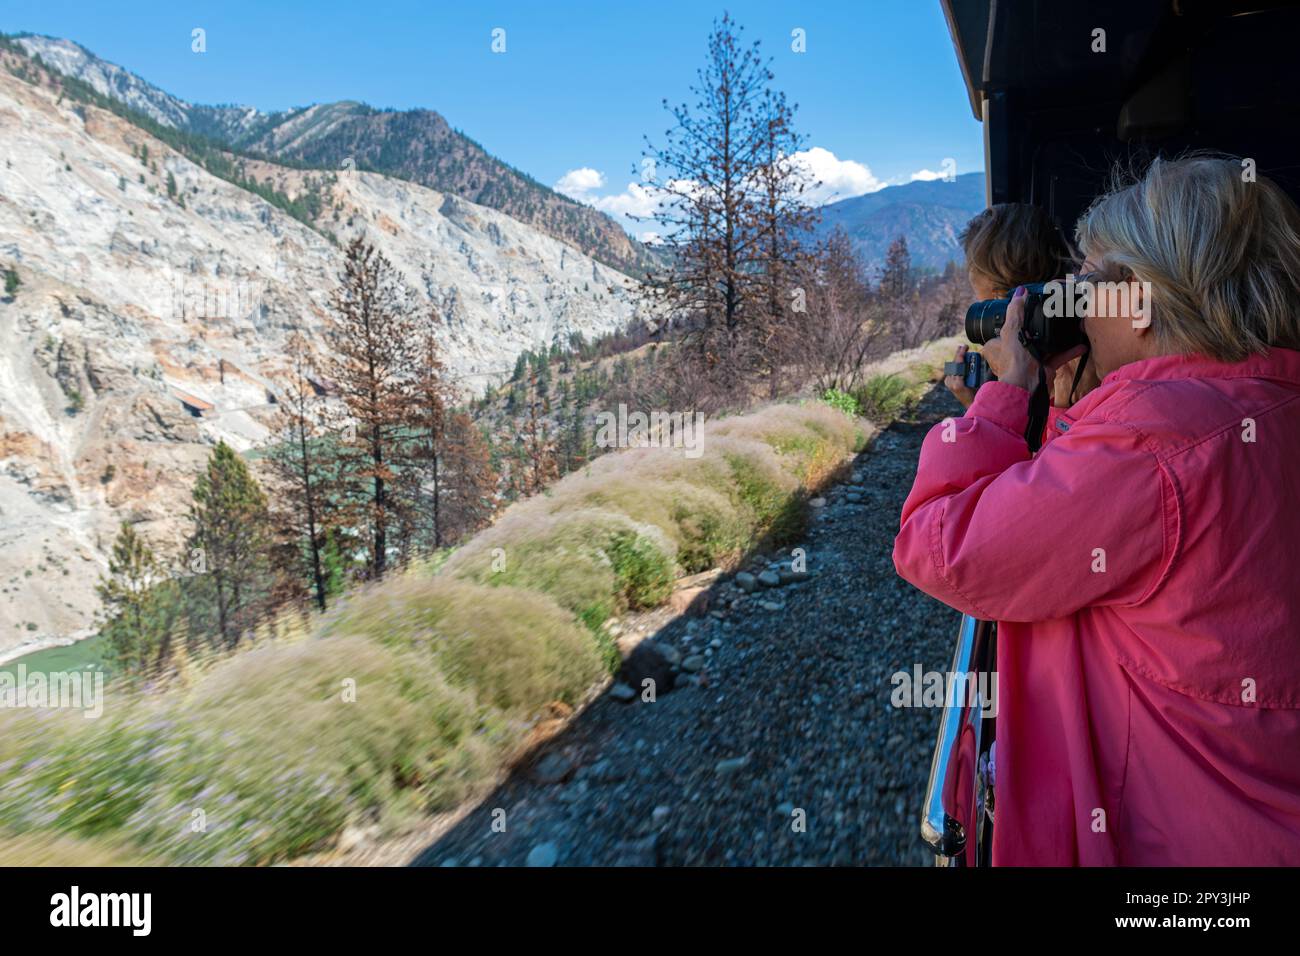 Tourist taking photographs of Fraser River and Valley, Rocky Mountaineer train, Canada. Stock Photo